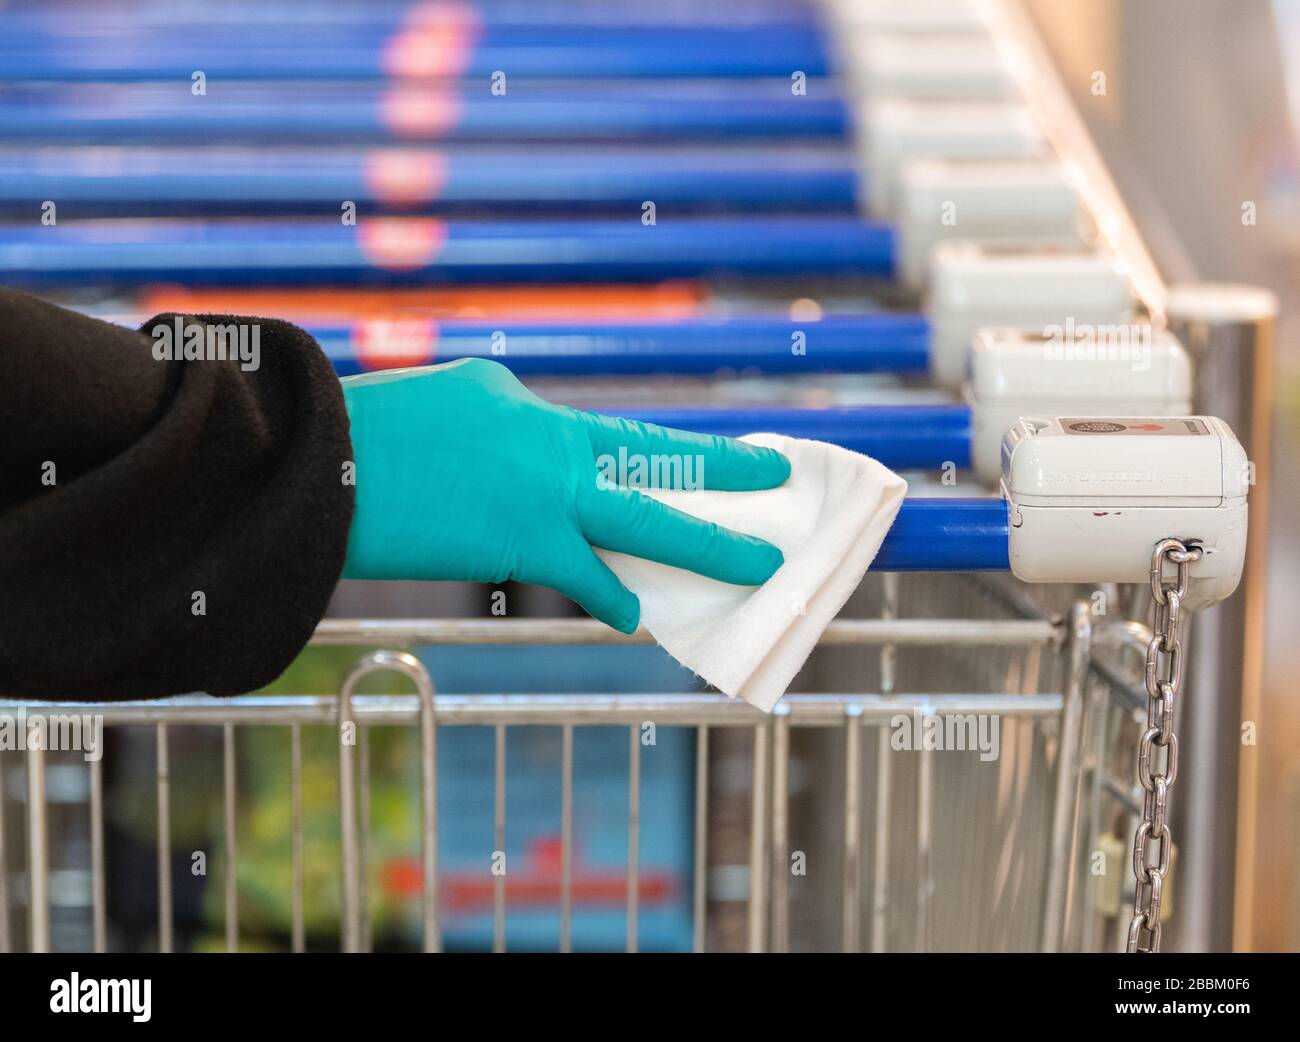 01 April 2020, Saxony, Dresden: An employee of the security service of a 'Konsum' supermarket wears protective gloves while wiping the handle of a customer's shopping trolley with a disinfectant wipe before visiting the market. In order to slow the spread of the corona virus, the federal government has further severely restricted public life. The novel coronavirus is mainly transmitted by droplet infection. Photo: Robert Michael/dpa-Zentralbild/dpa Stock Photo